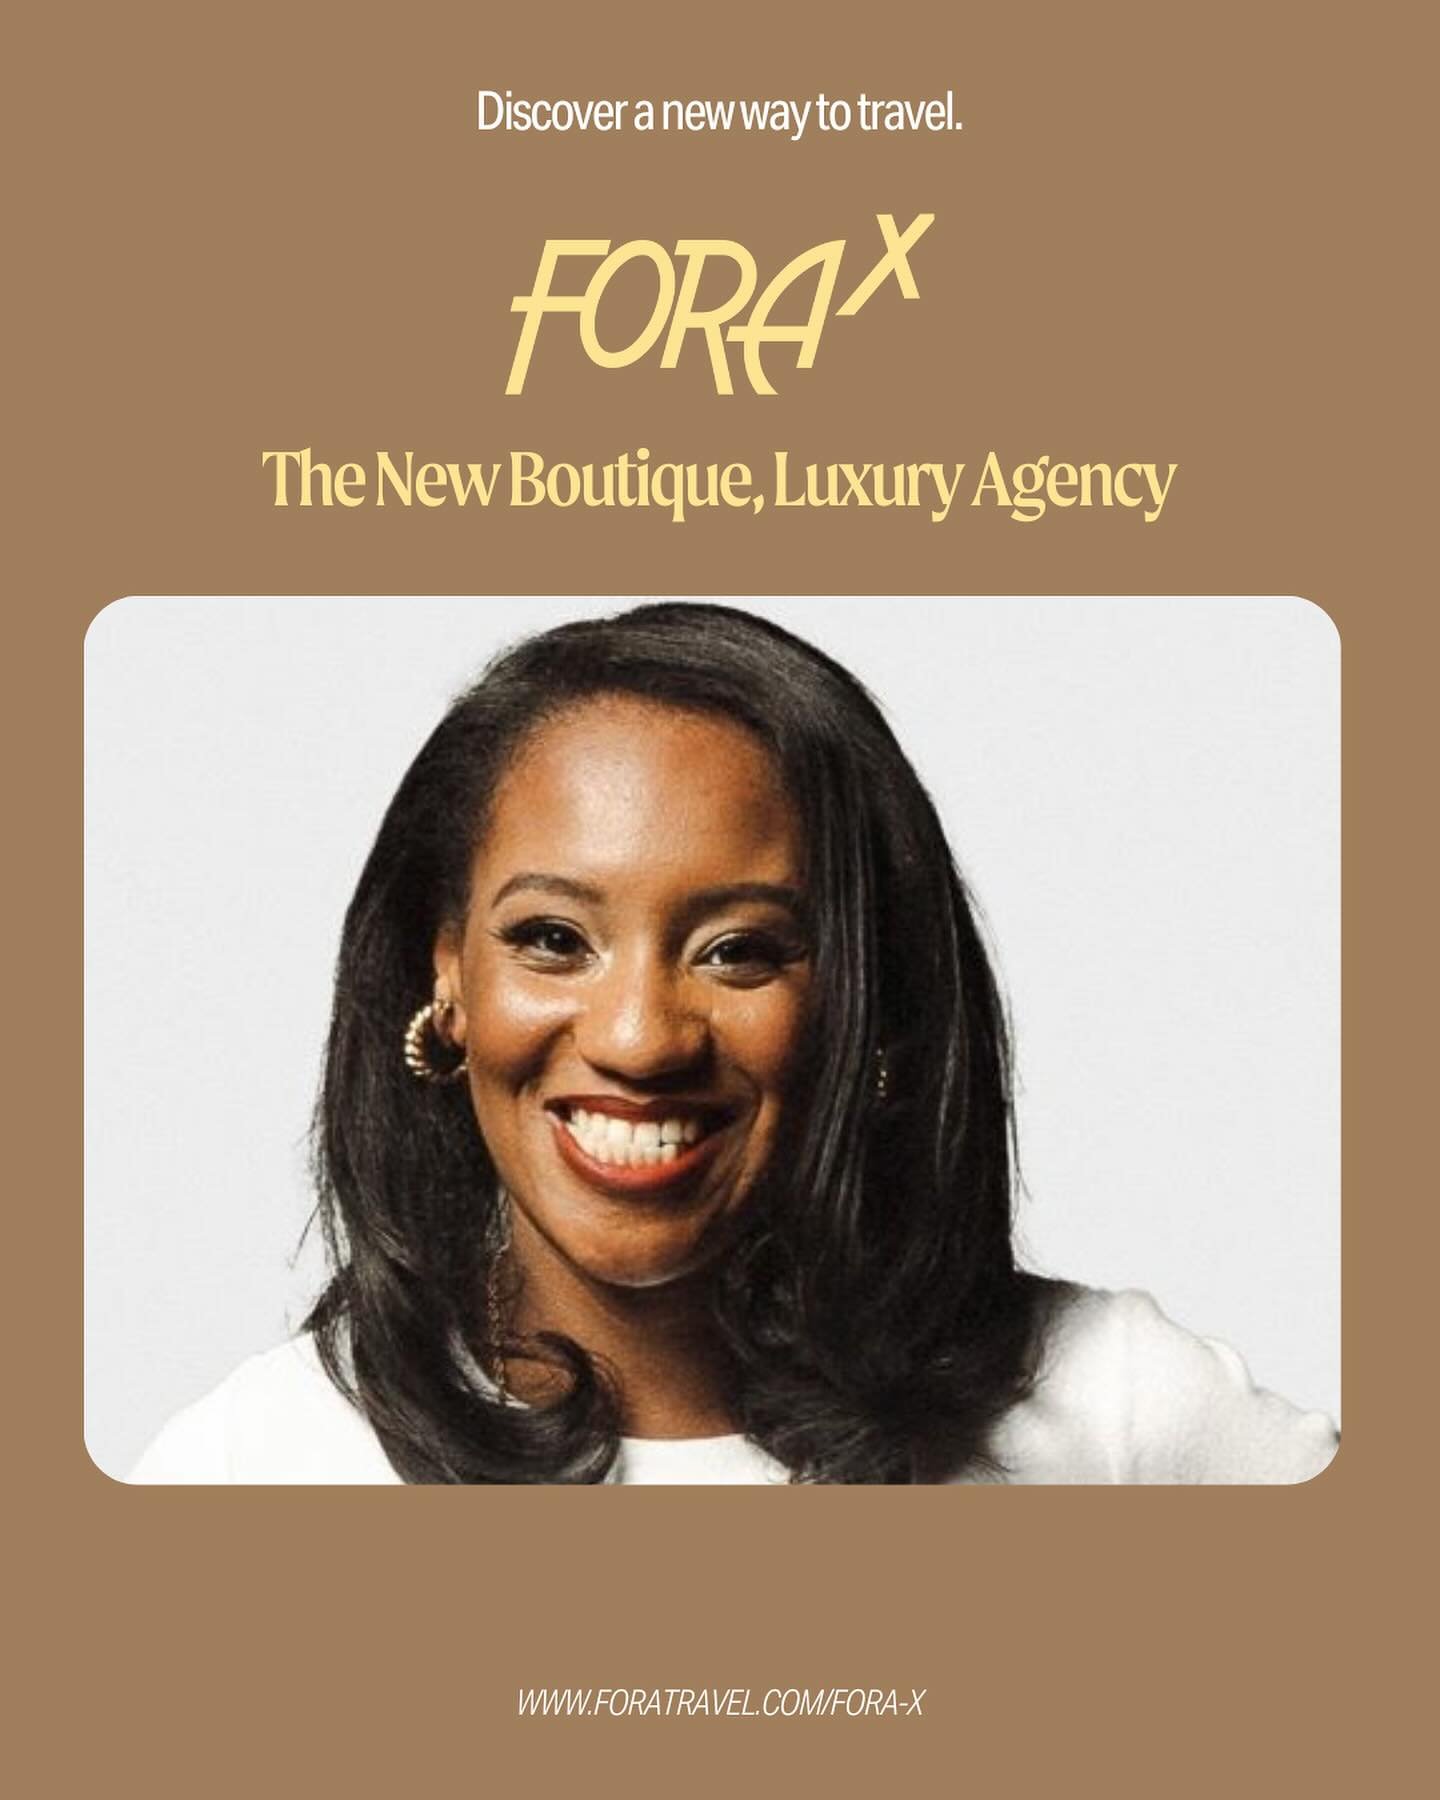 I&rsquo;m ecstatic to announce that I have been invited to be part of Fora&rsquo;s new invite-only, luxury boutique agency for top producers: Fora X!

Arranged By A&rsquo;Rie started as a passion project because I wanted my community to experience tr